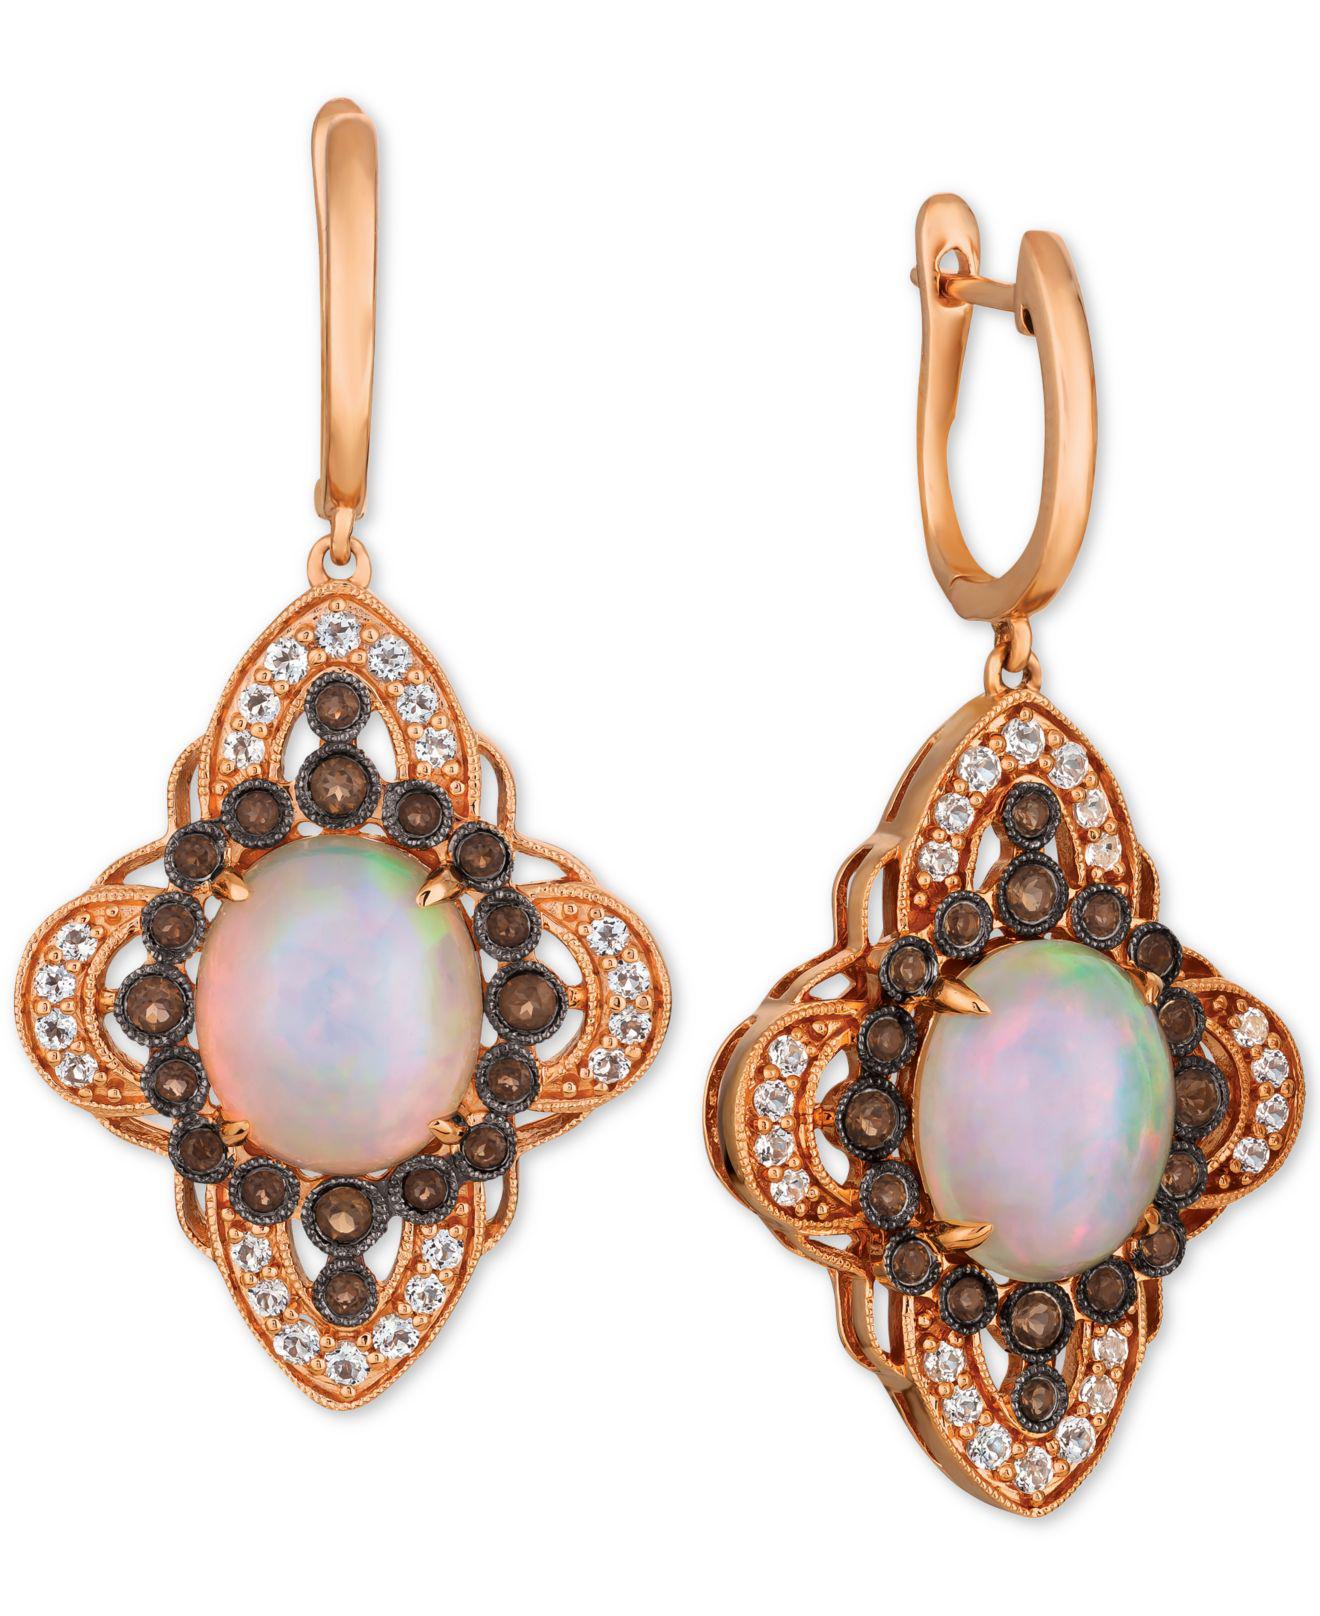 Lyst Le Vian Crazy Collection® Multigemstone Drop Earrings (57/8 Ct. T.w.) In 14k Rose Gold